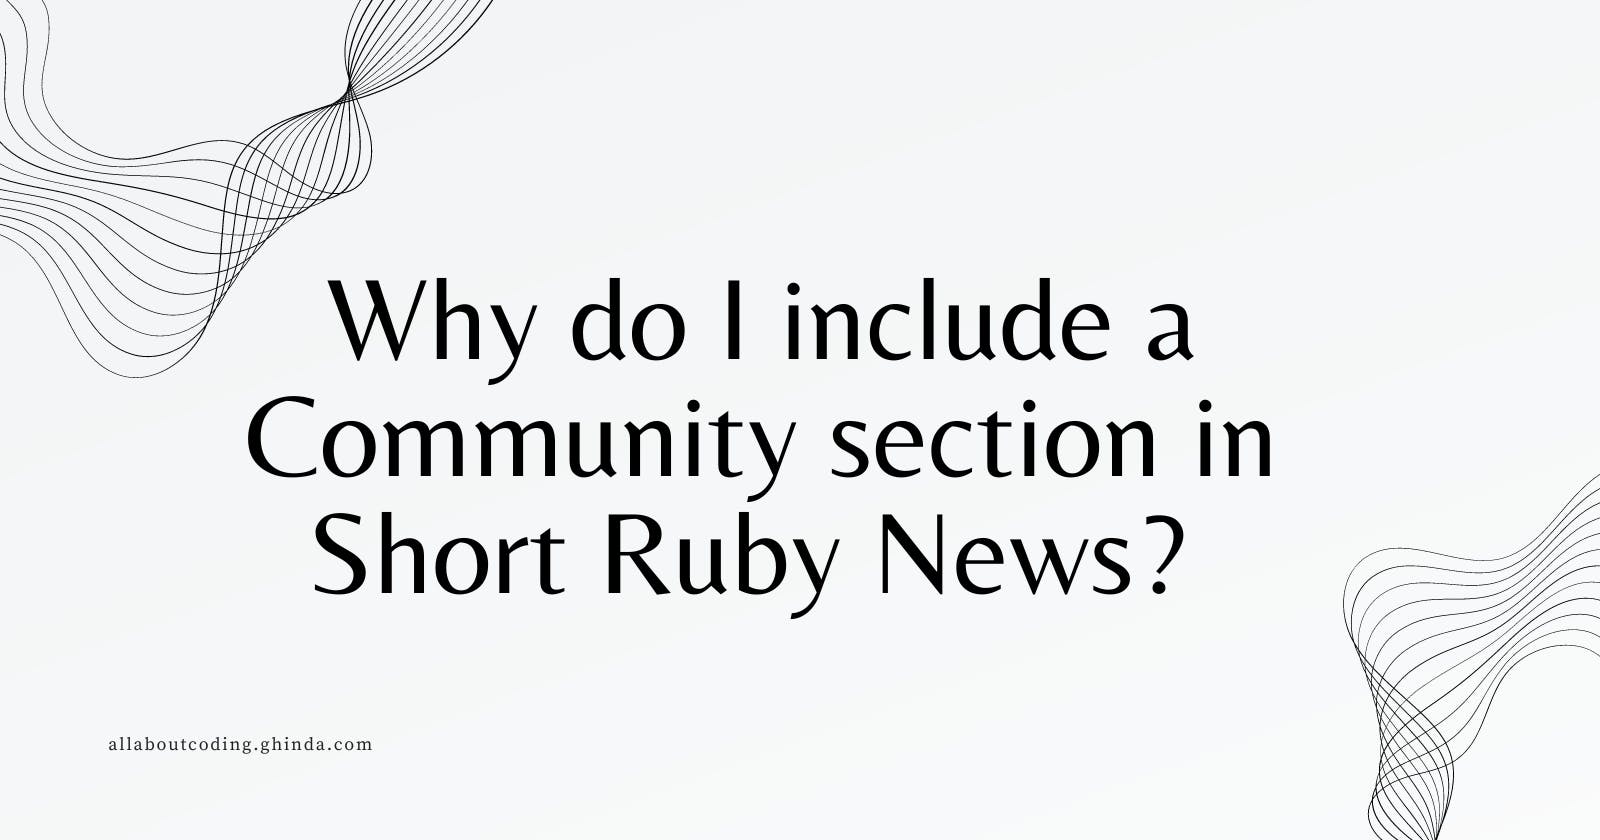 Why do I include a Community section in Short Ruby News?